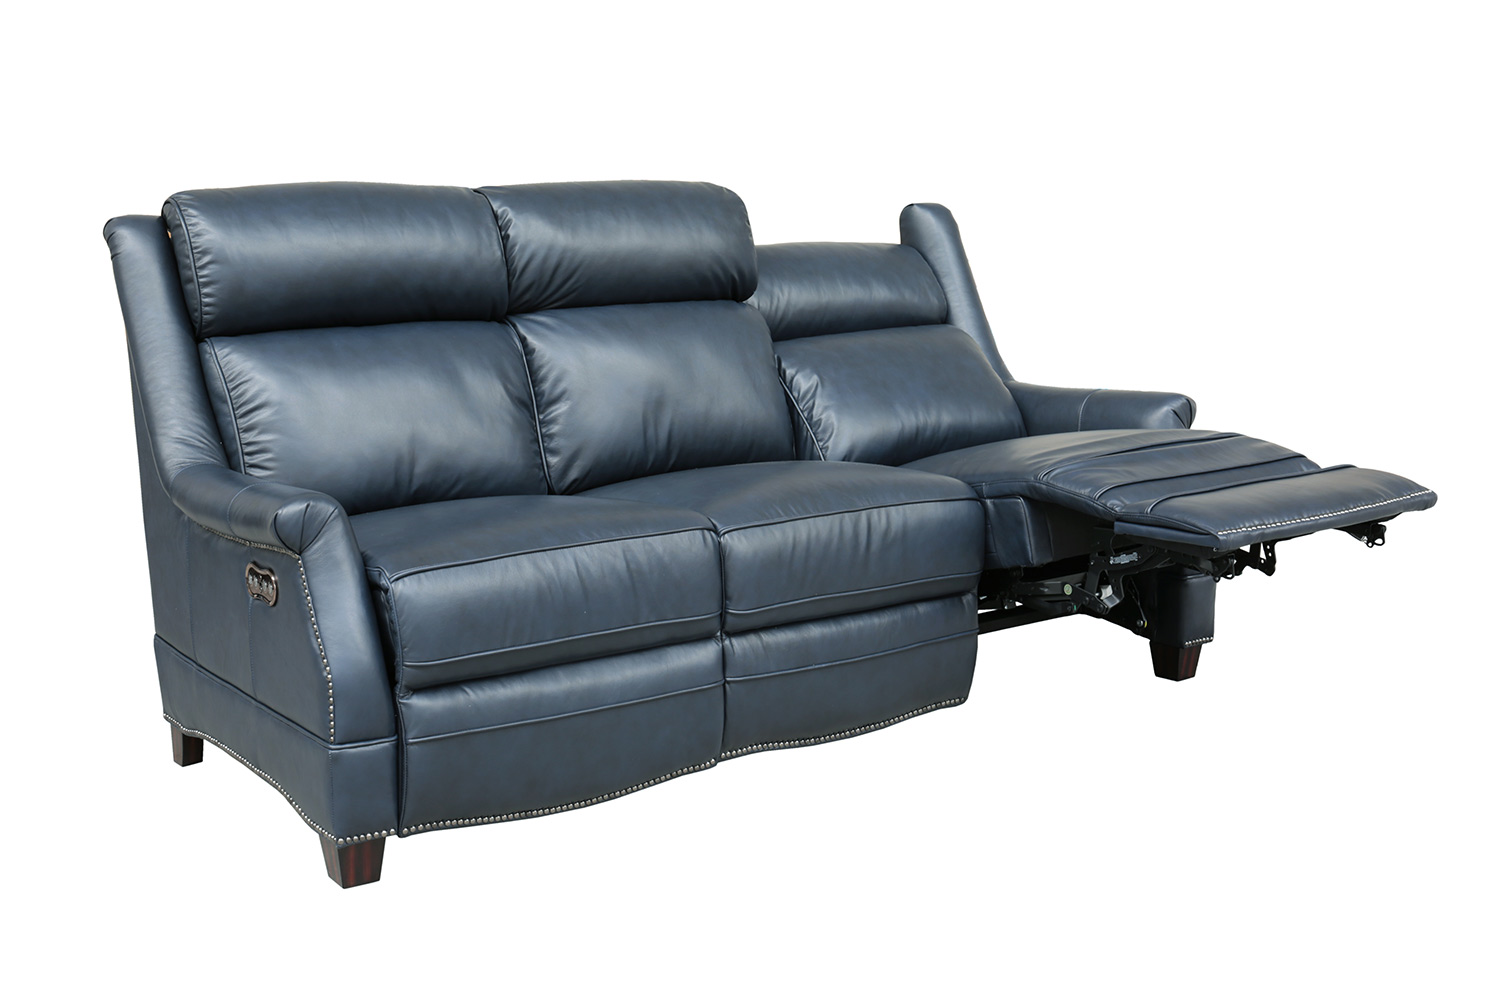 Barcalounger Warrendale Power Reclining Sofa with Power Head Rests - Shoreham Blue/All Leather